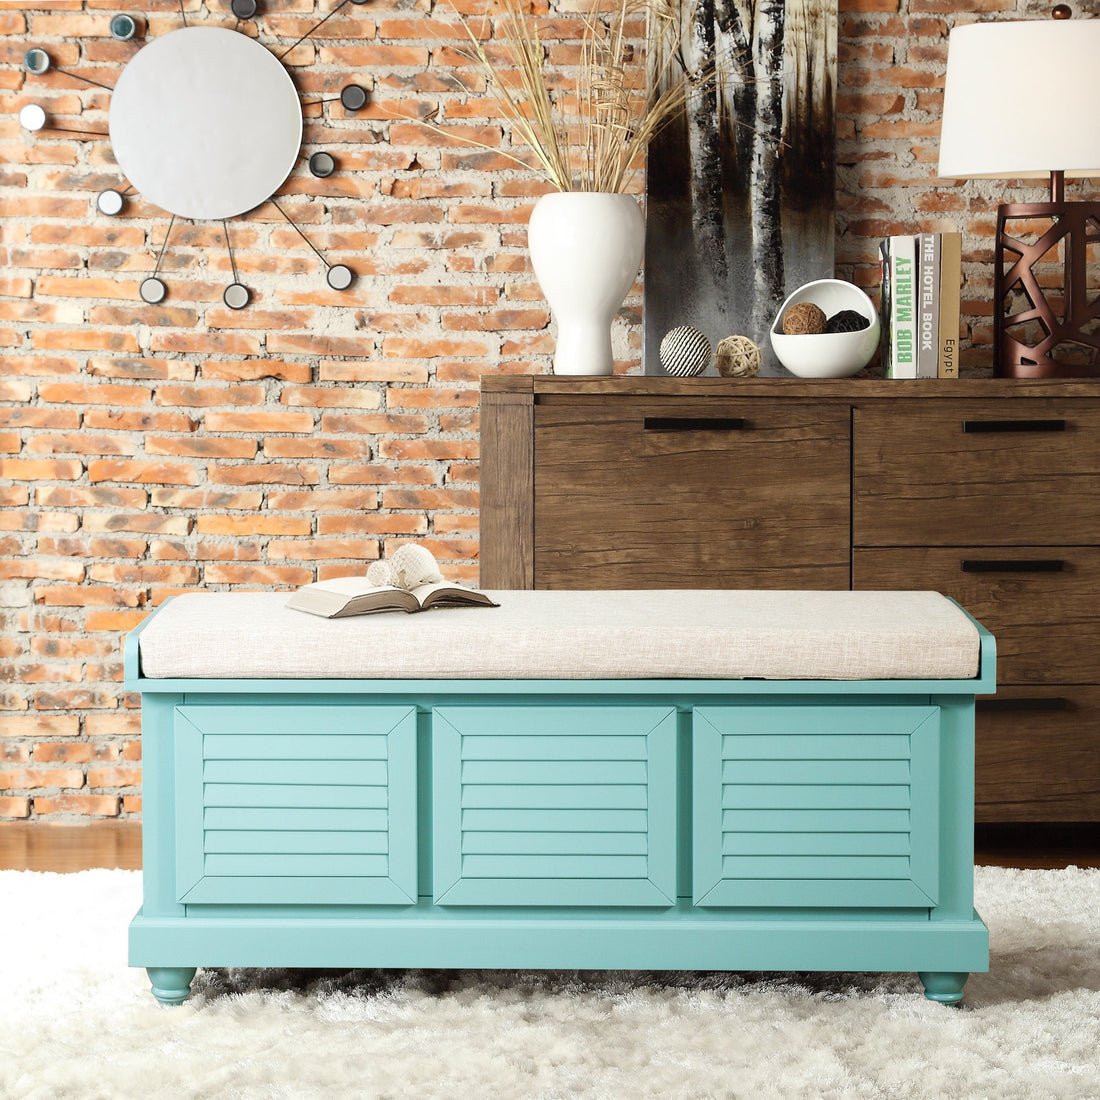 Woody Antique Teal Lift Top Storage Bench - HM4769TL - Bien Home Furniture &amp; Electronics